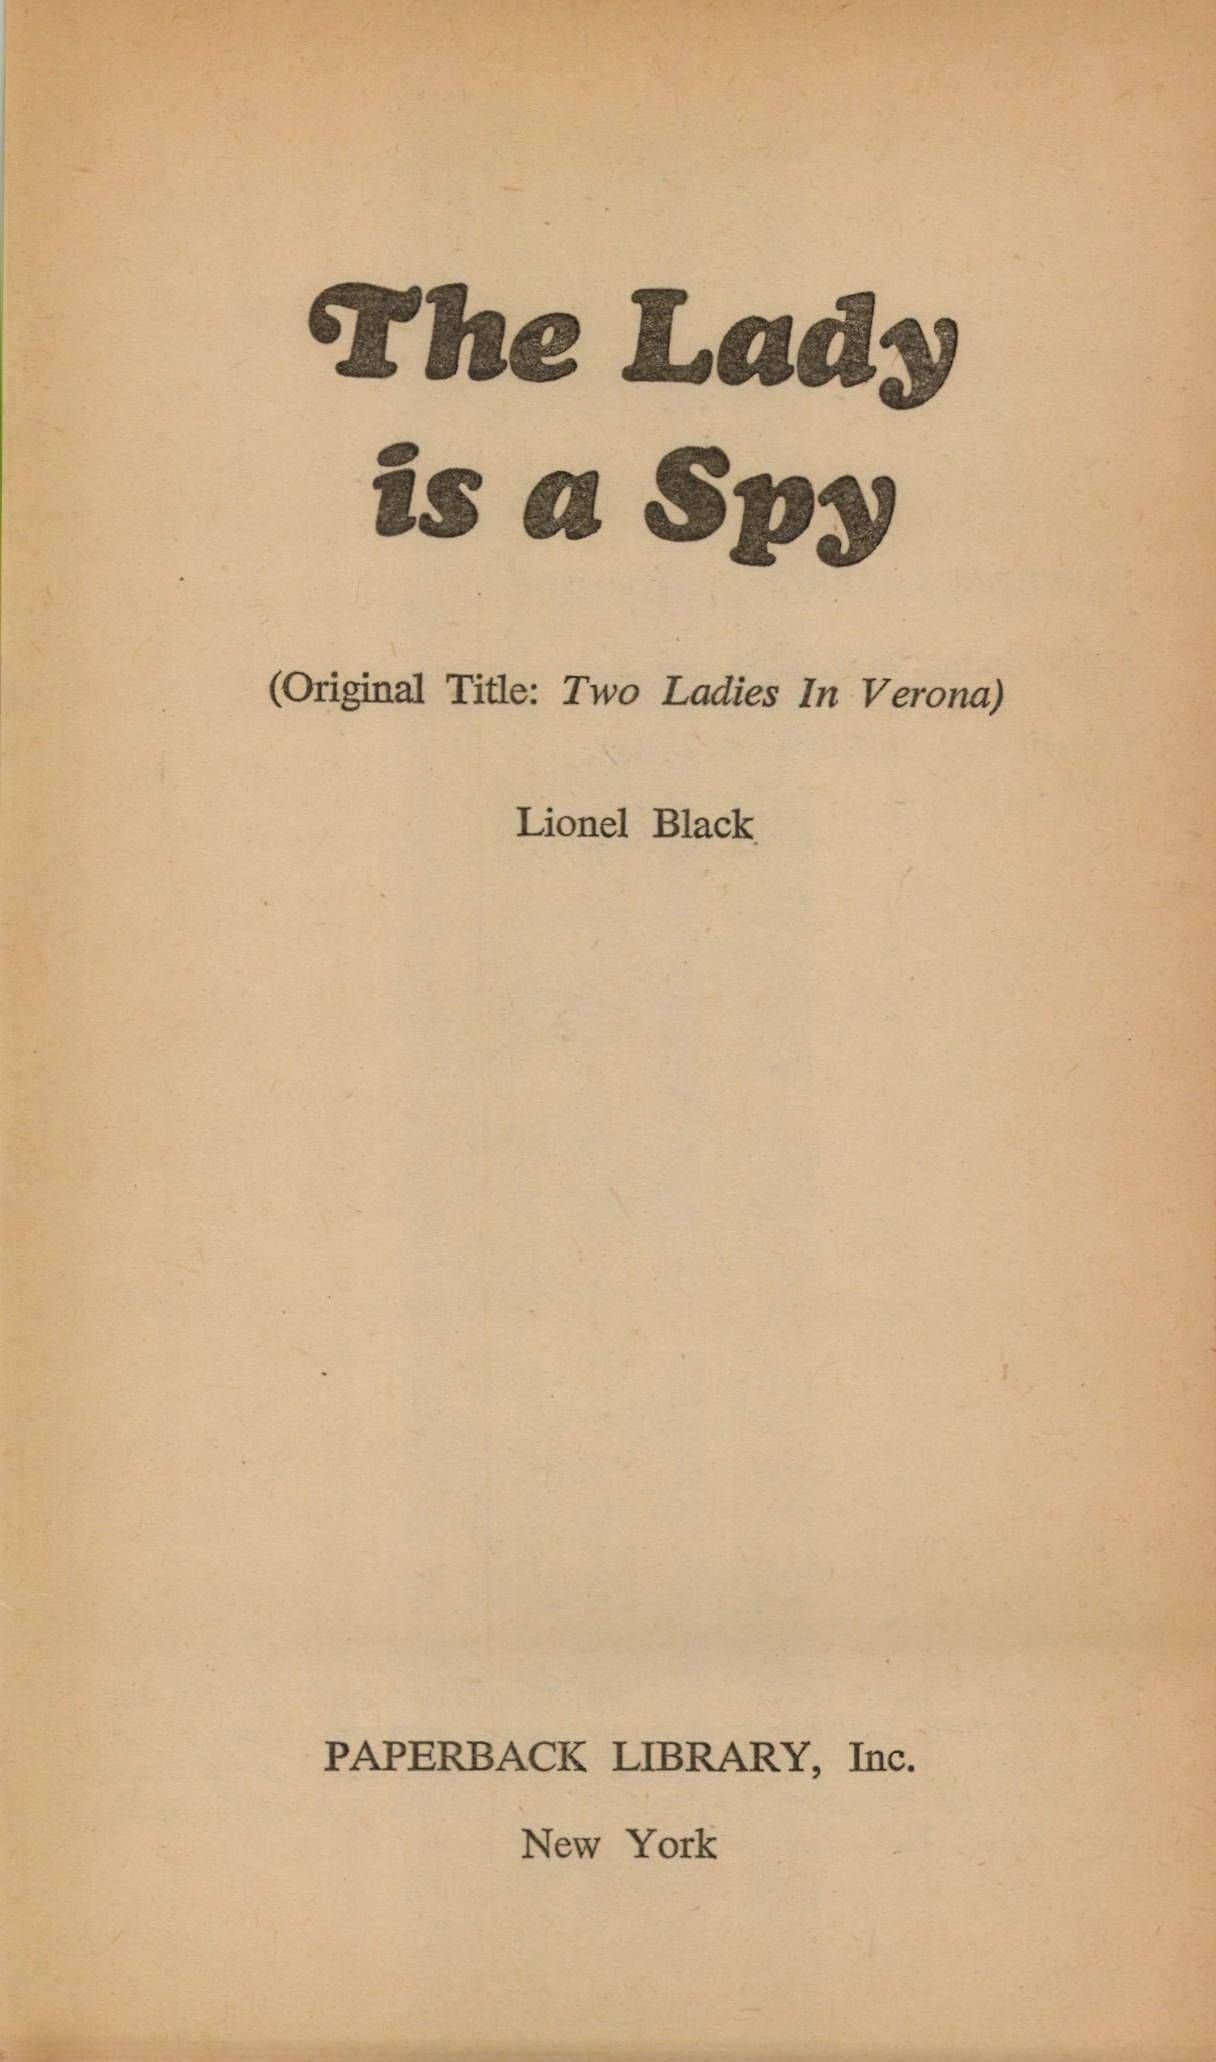 The Lady is a Spy Lionel Black 004.jpg